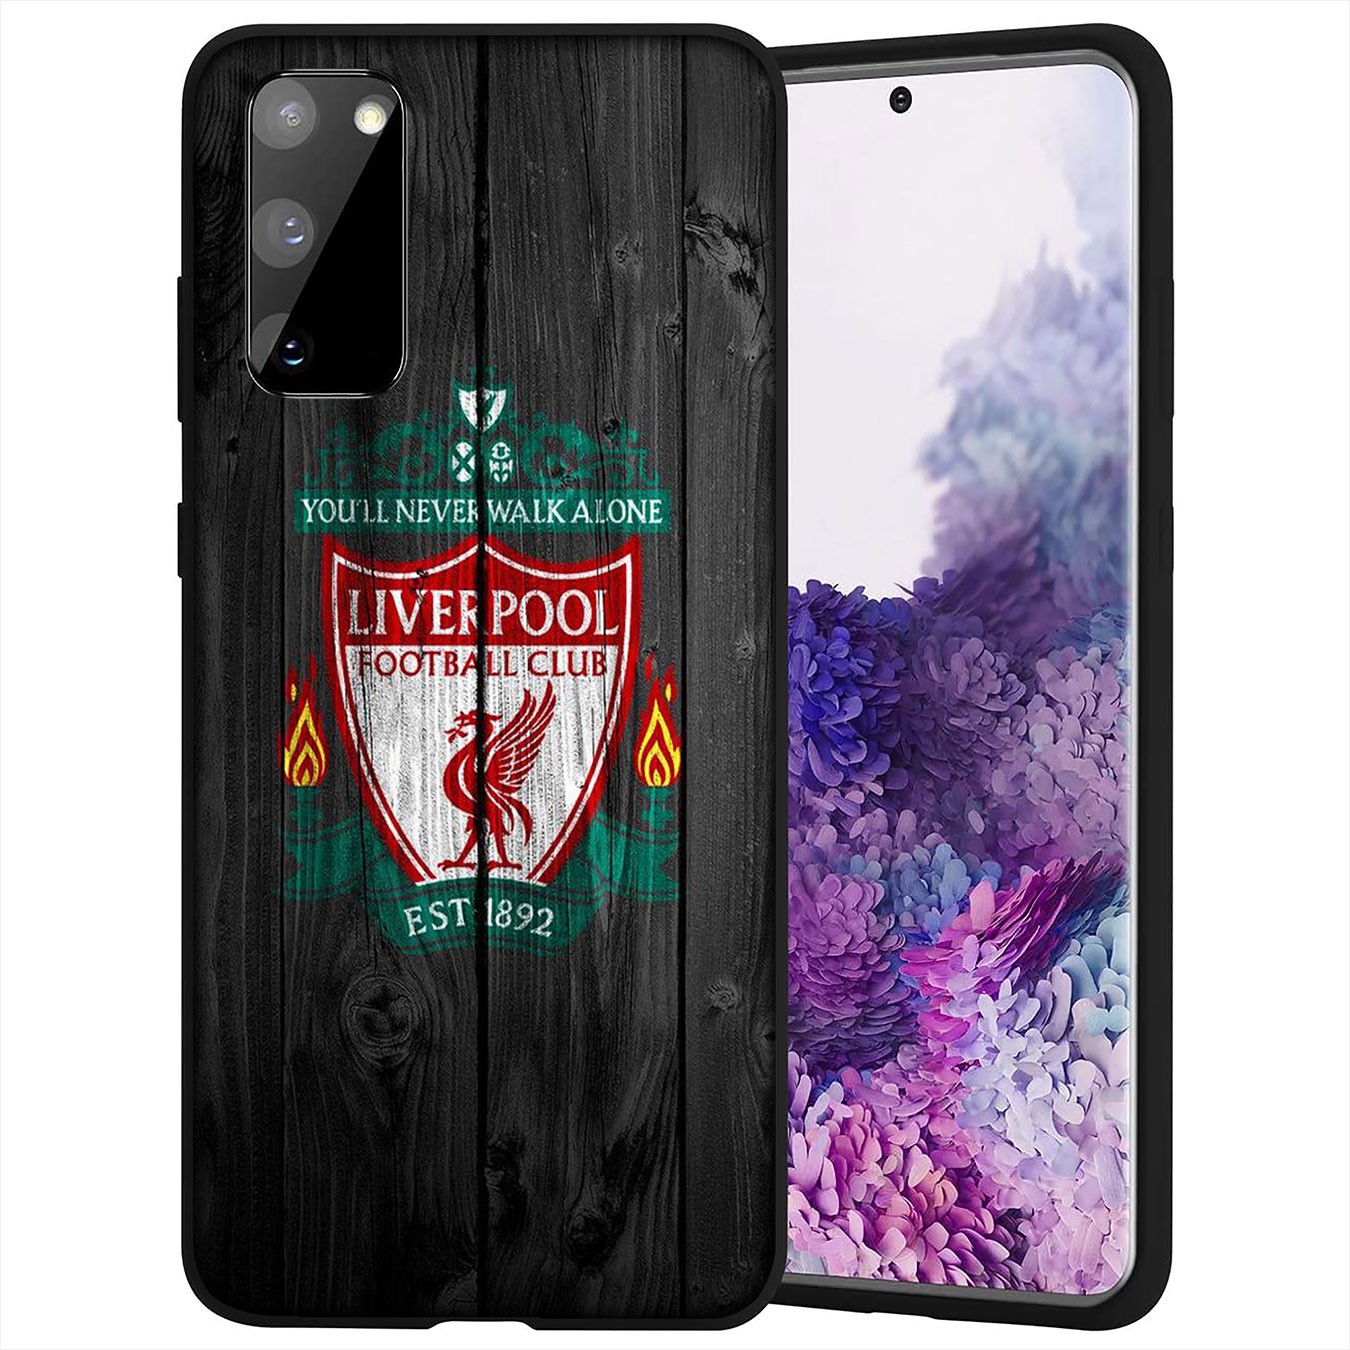 Samsung Galaxy S21 Ultra S8 Plus F62 M62 A2 A32 A52 A72 S21+ S8+ S21Plus Casing Soft Silicone Liverpool Football logo Phone Case